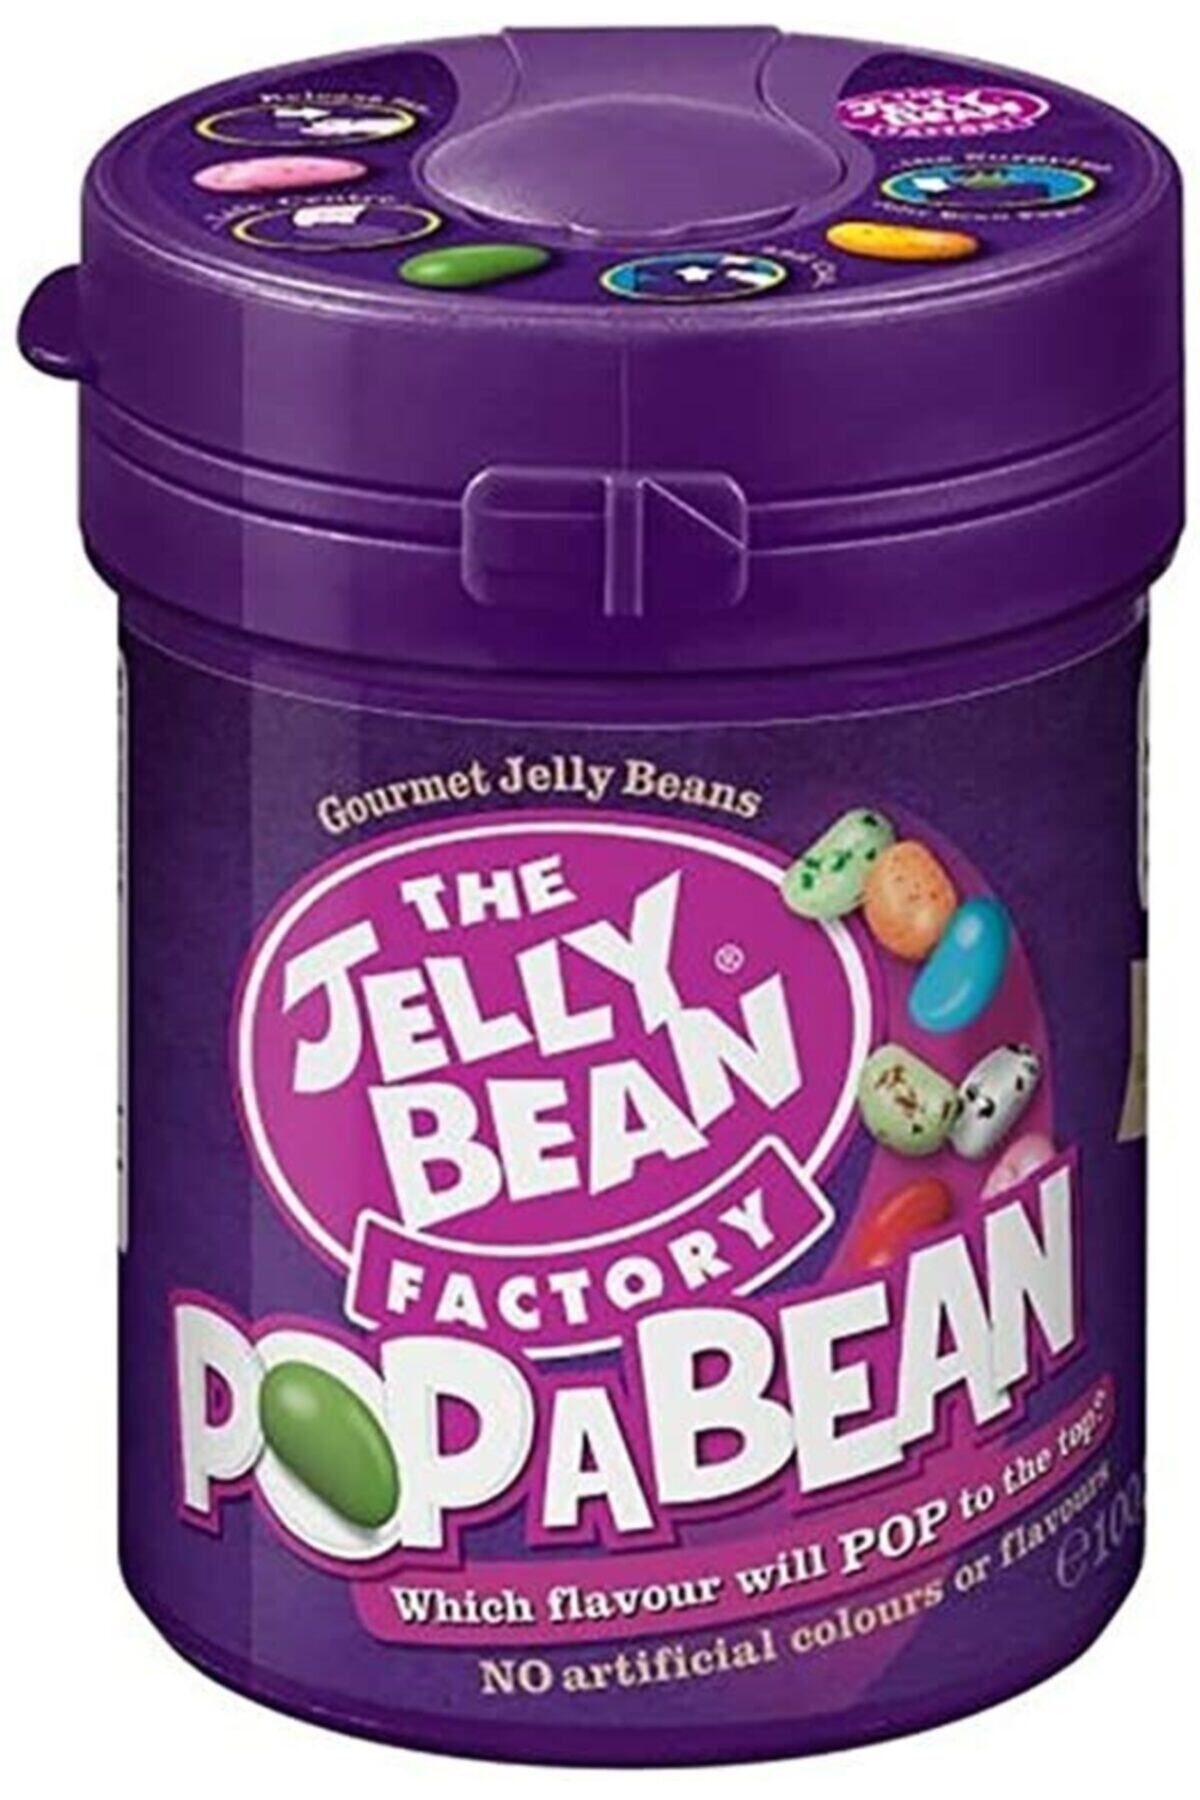 Jelly brains 18. The Jelly Bean Factory 36. The Jelly Bean Factory вкусы. The Jelly Bean Factory 36 вкусов. The Jelly Bean Factory 18 вкусов.